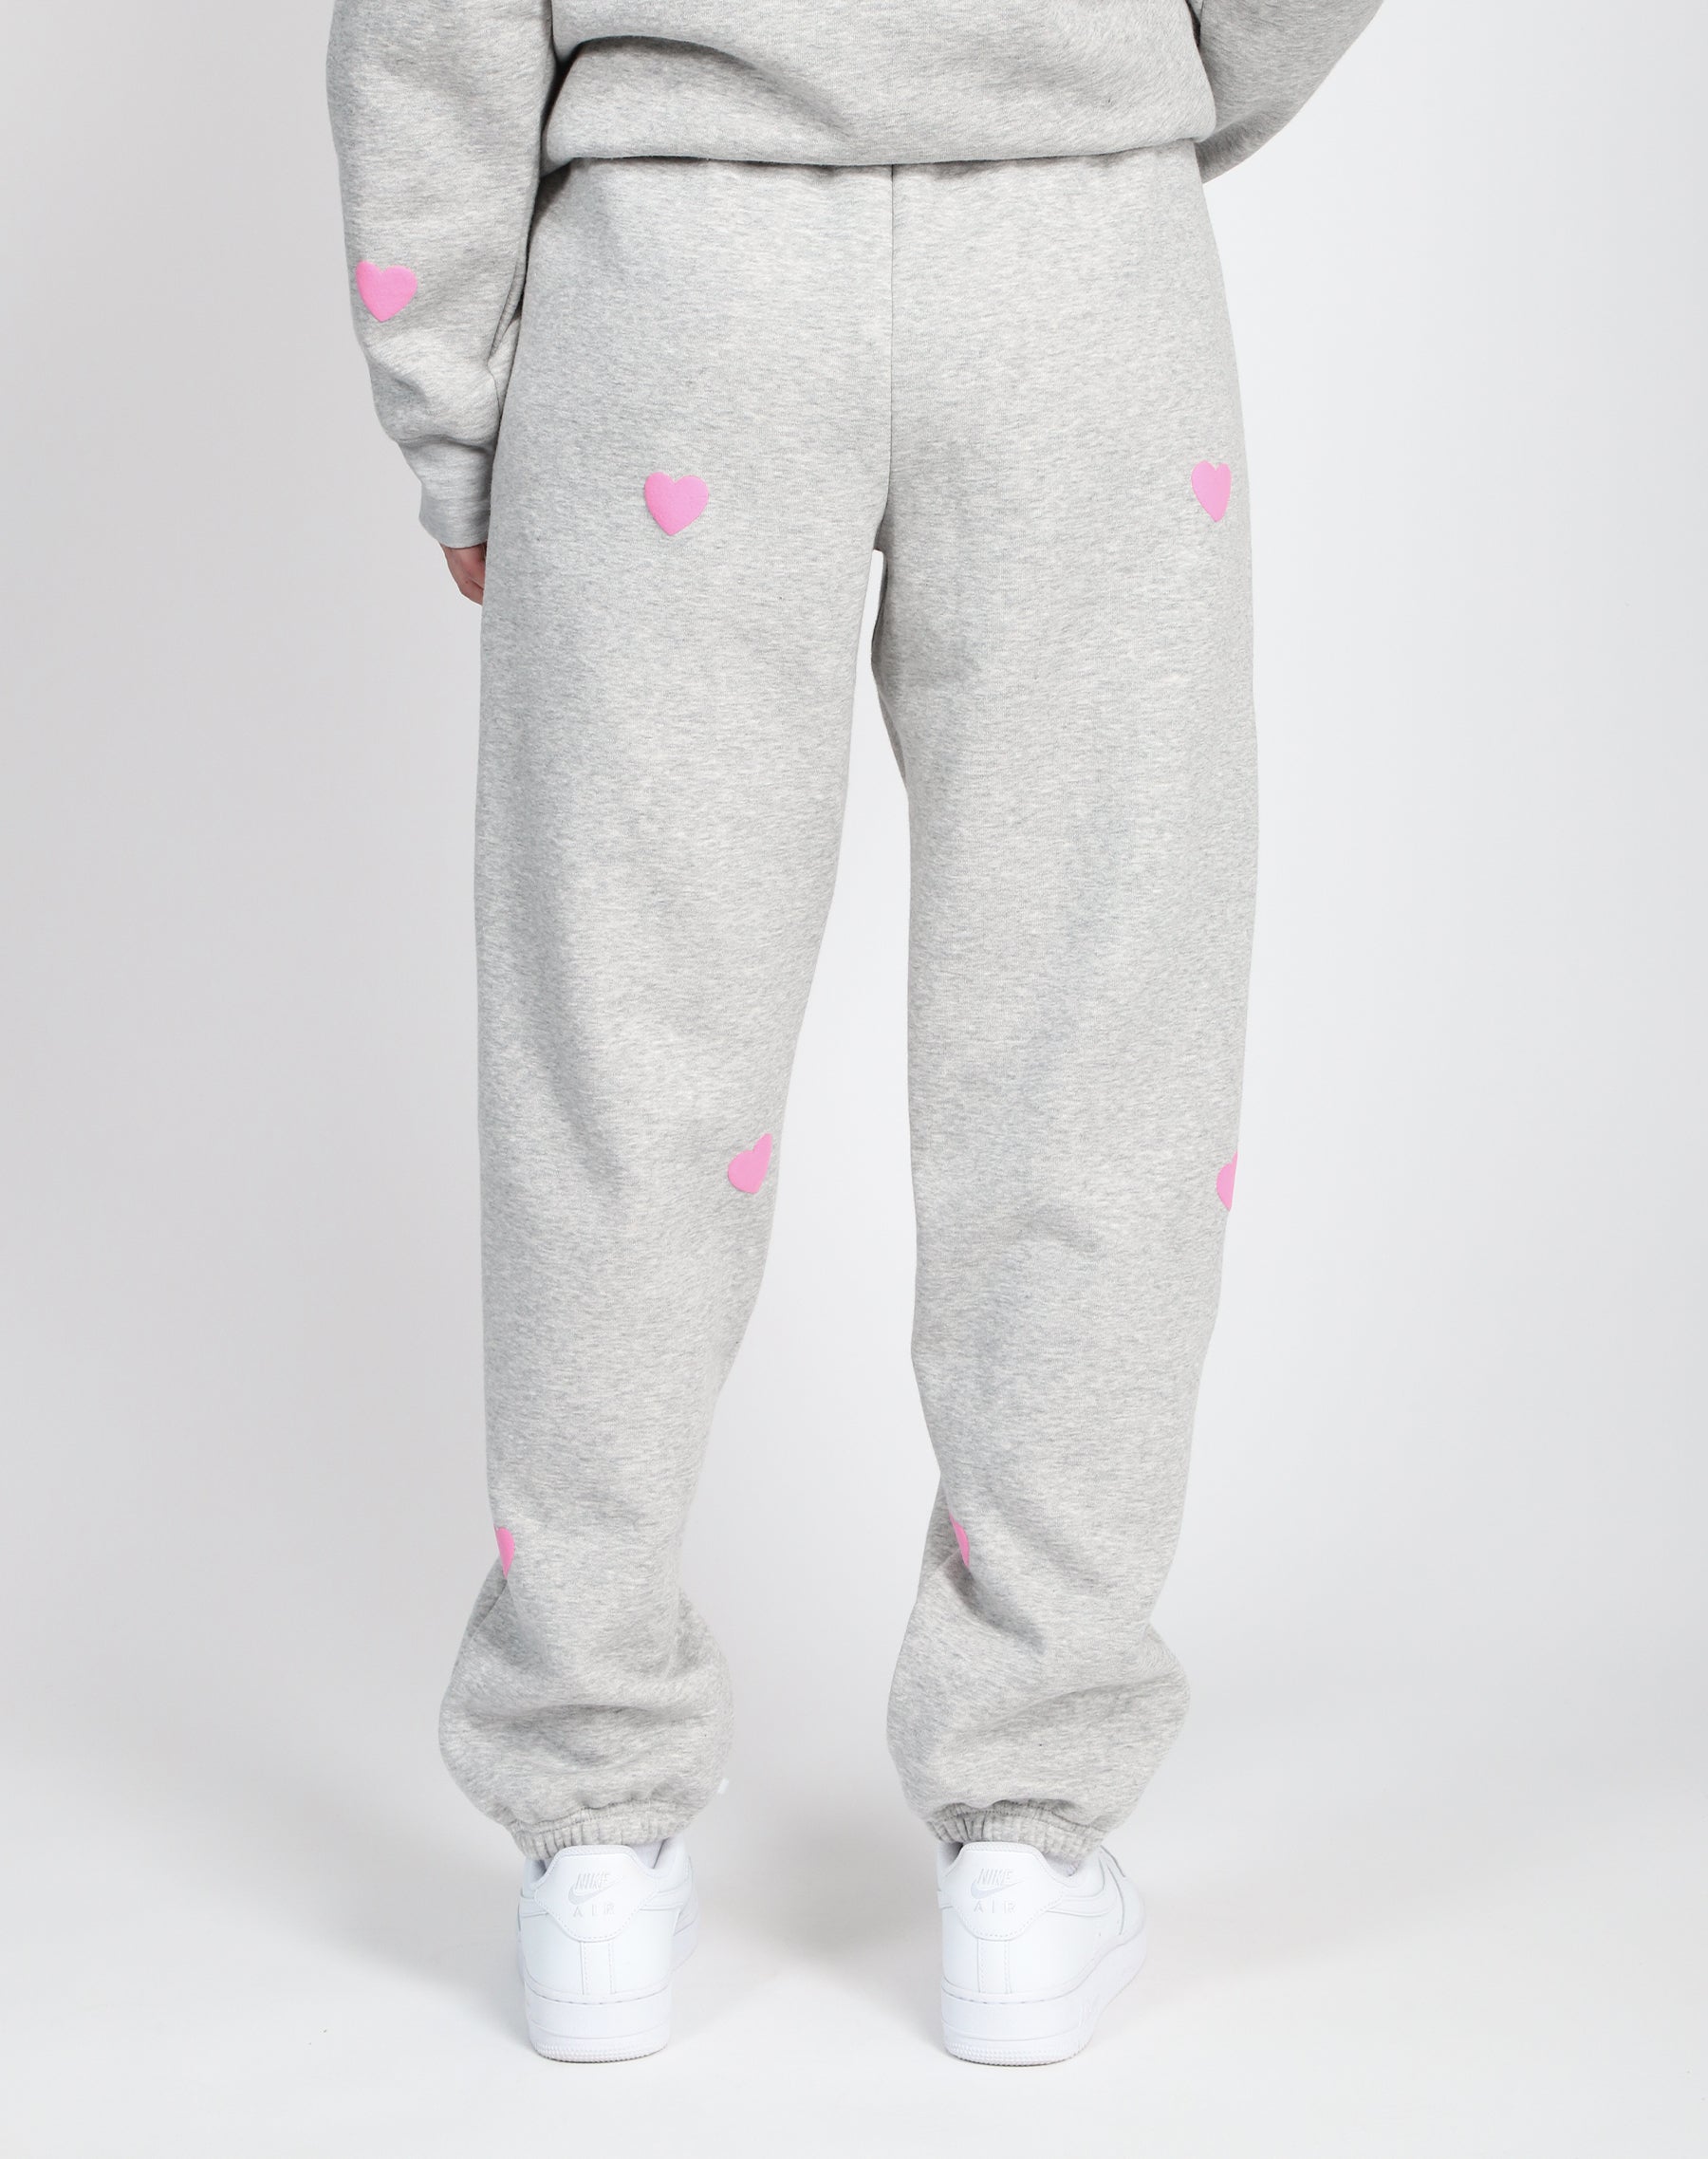 The "ALL OVER HEART" Oversized Joggers | Pebble Grey & Baby Pink